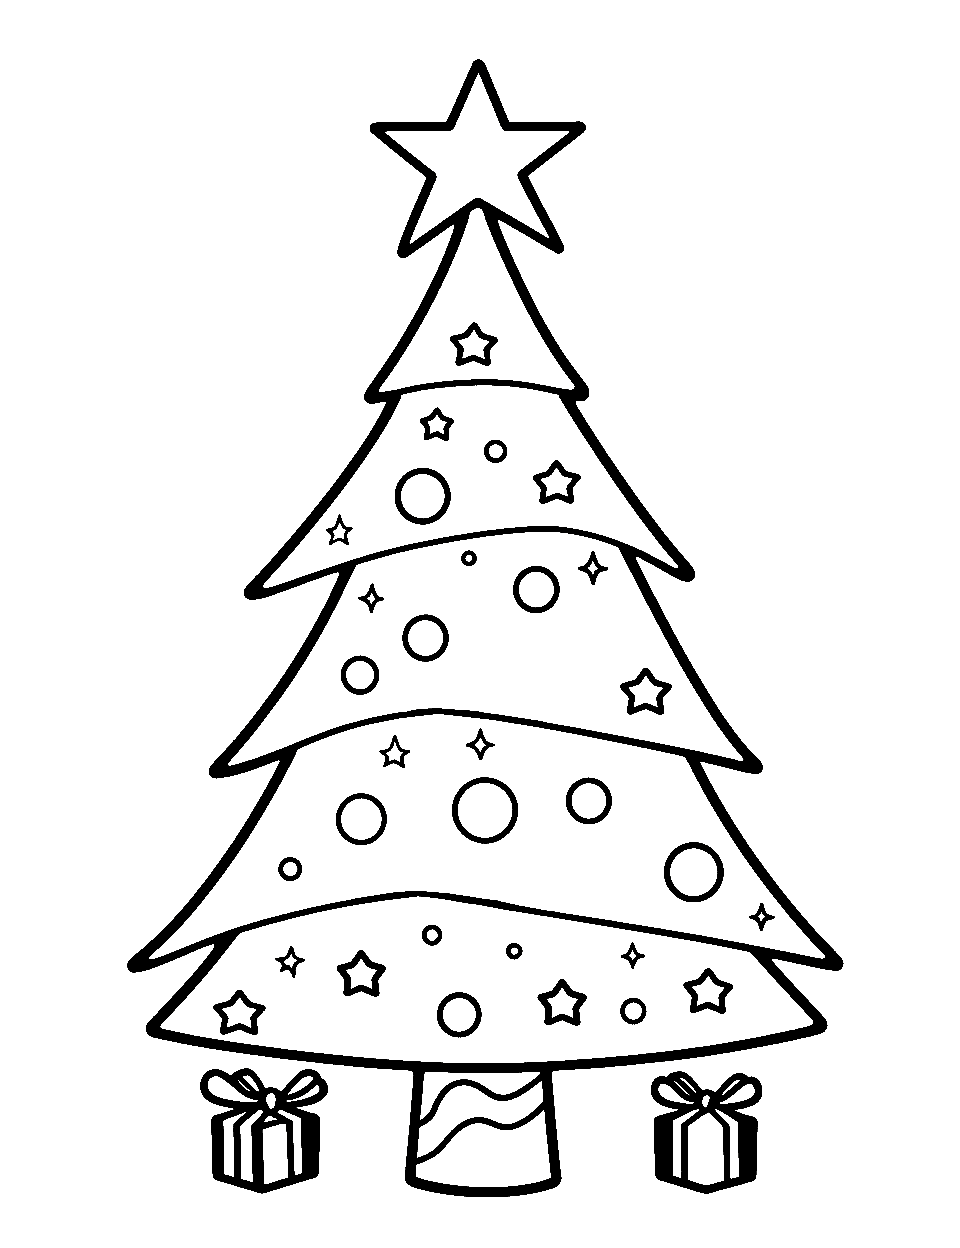 Cute and Simple Toddler Tree Coloring Page - A cute and uncomplicated Christmas tree with large ornaments and gifts, suitable for a toddler’s imaginative coloring.